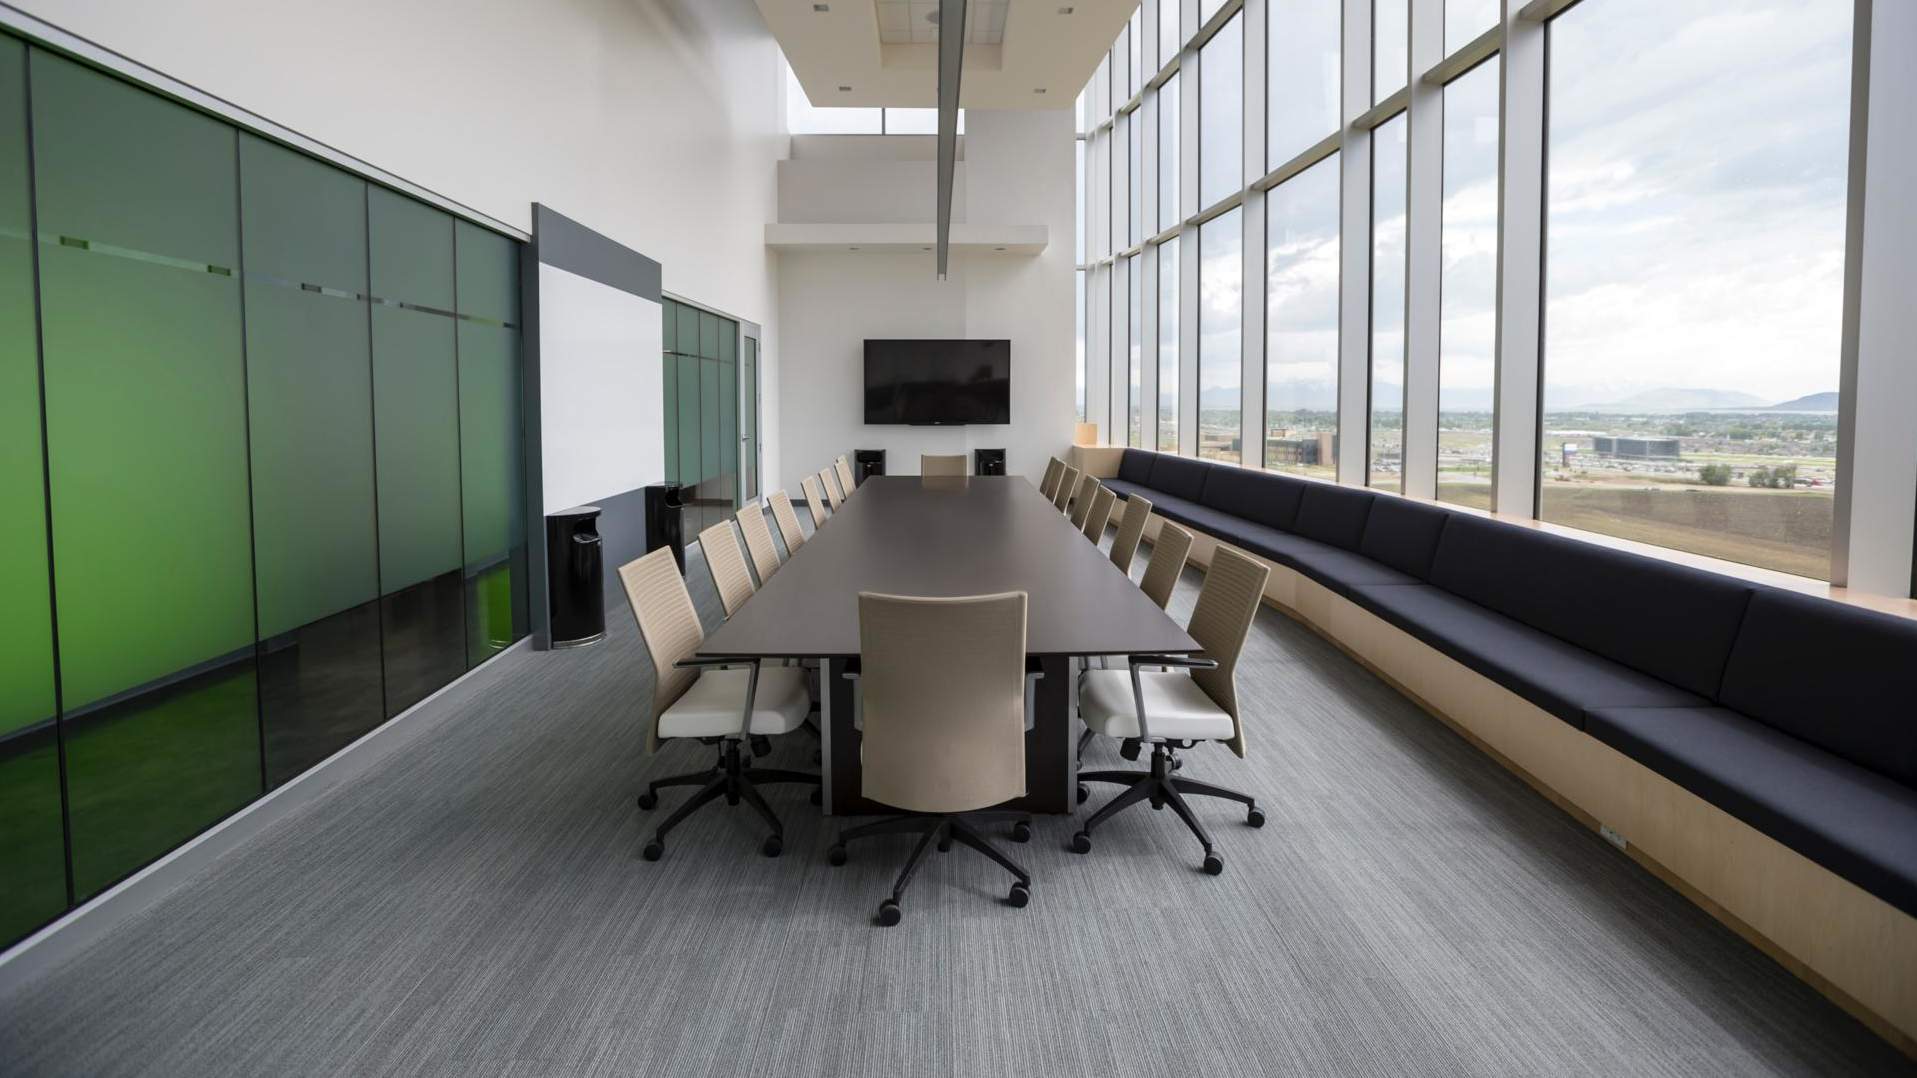 A photo of an empty meeting room to illustrate the remote workplace